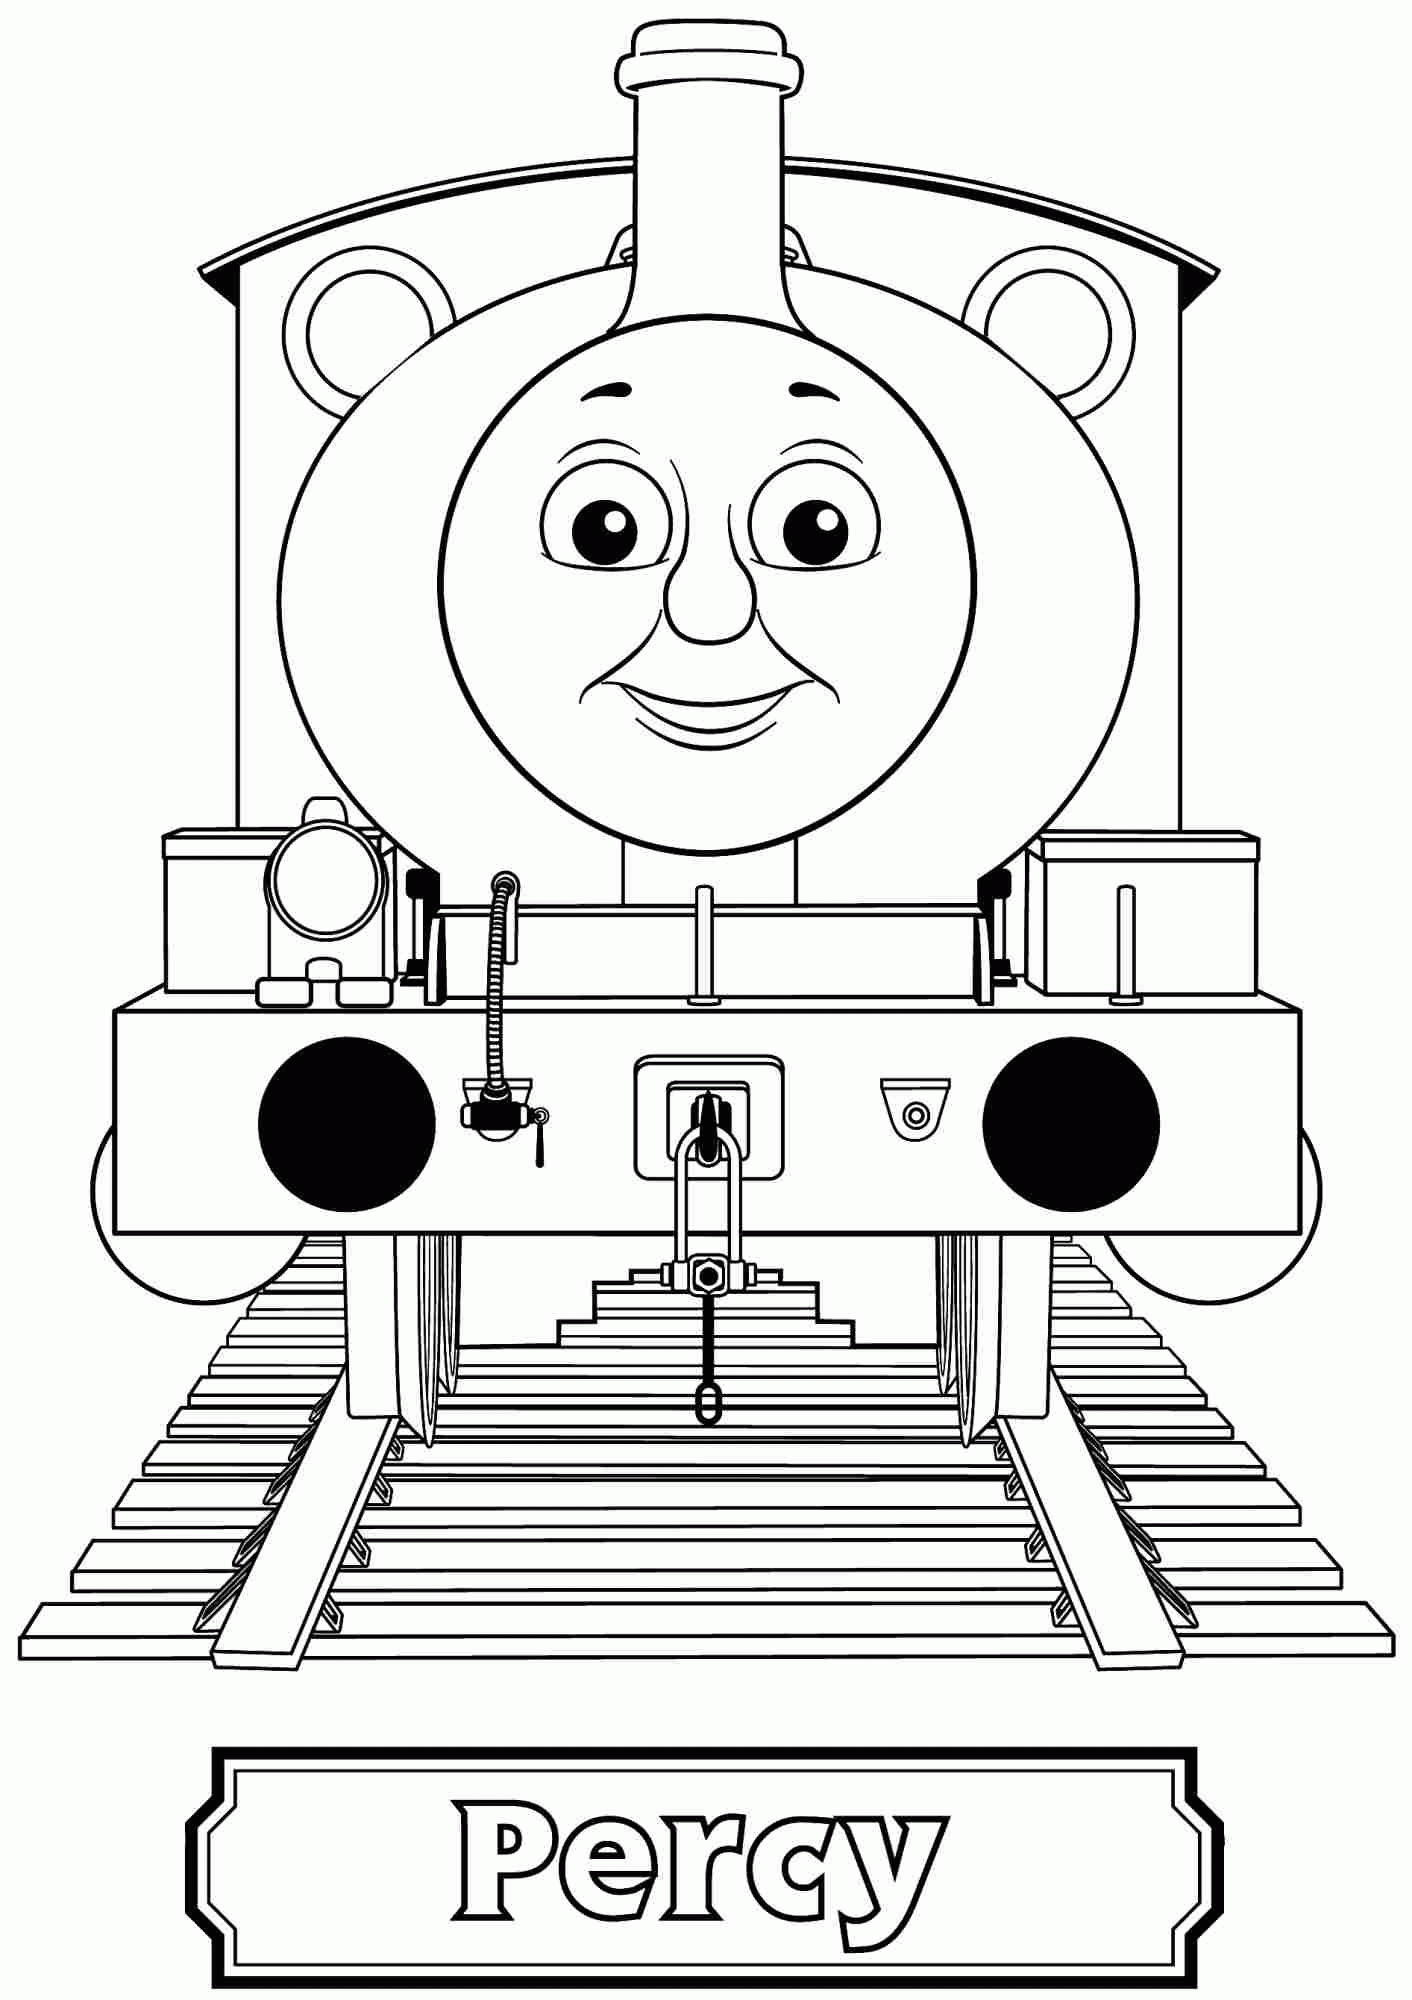 thomas-the-train-drawing-at-paintingvalley-explore-collection-of-thomas-the-train-drawing